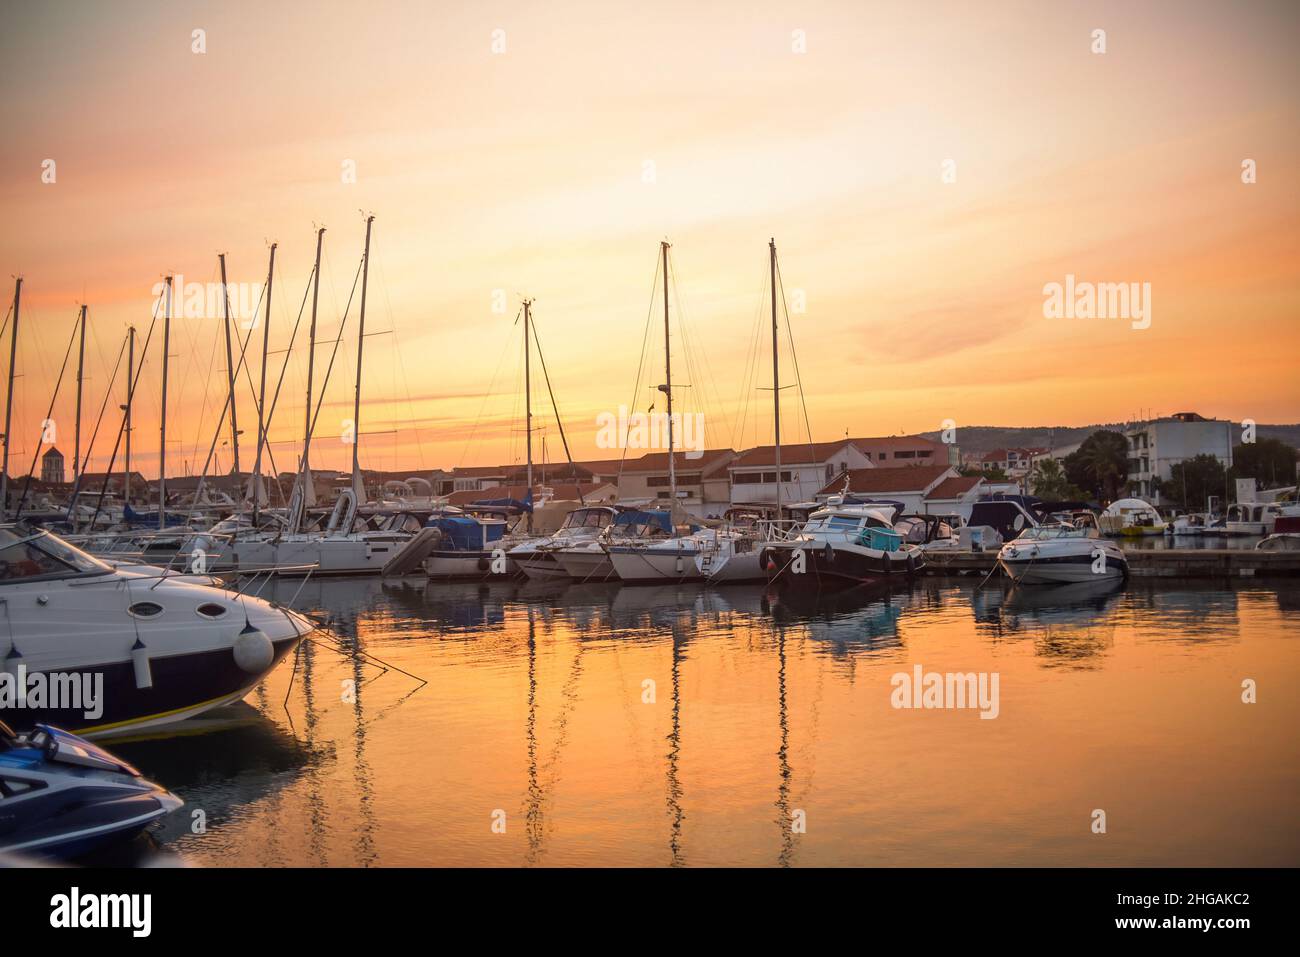 There are many yachts, boats and ships at sea. Marina at sunset. Vosice Croatia Gorgeous summer sunset by the ocean Stock Photo